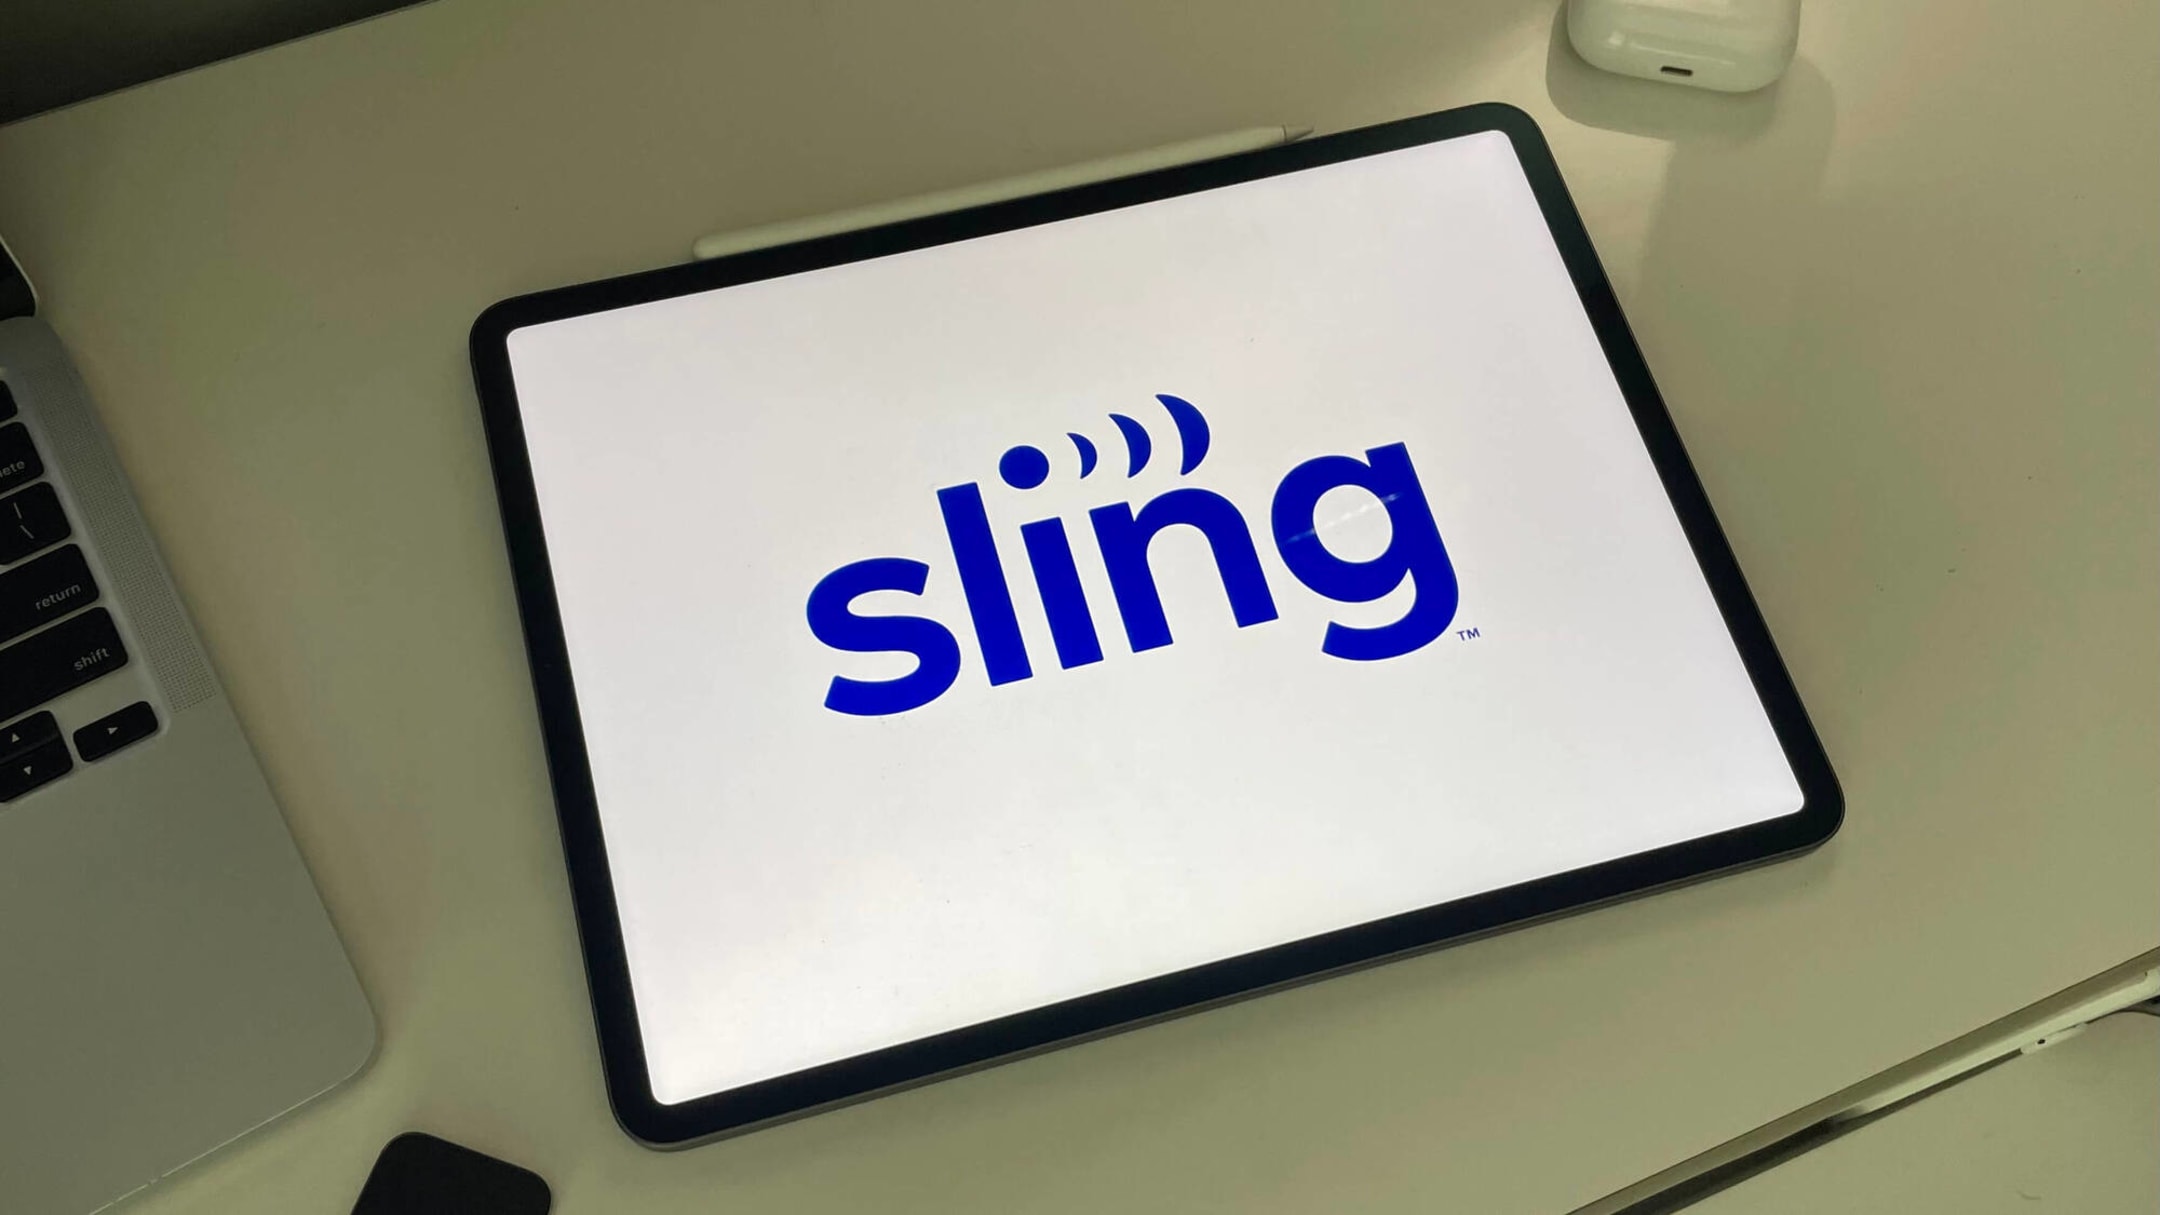 Sling TV packages and pricing